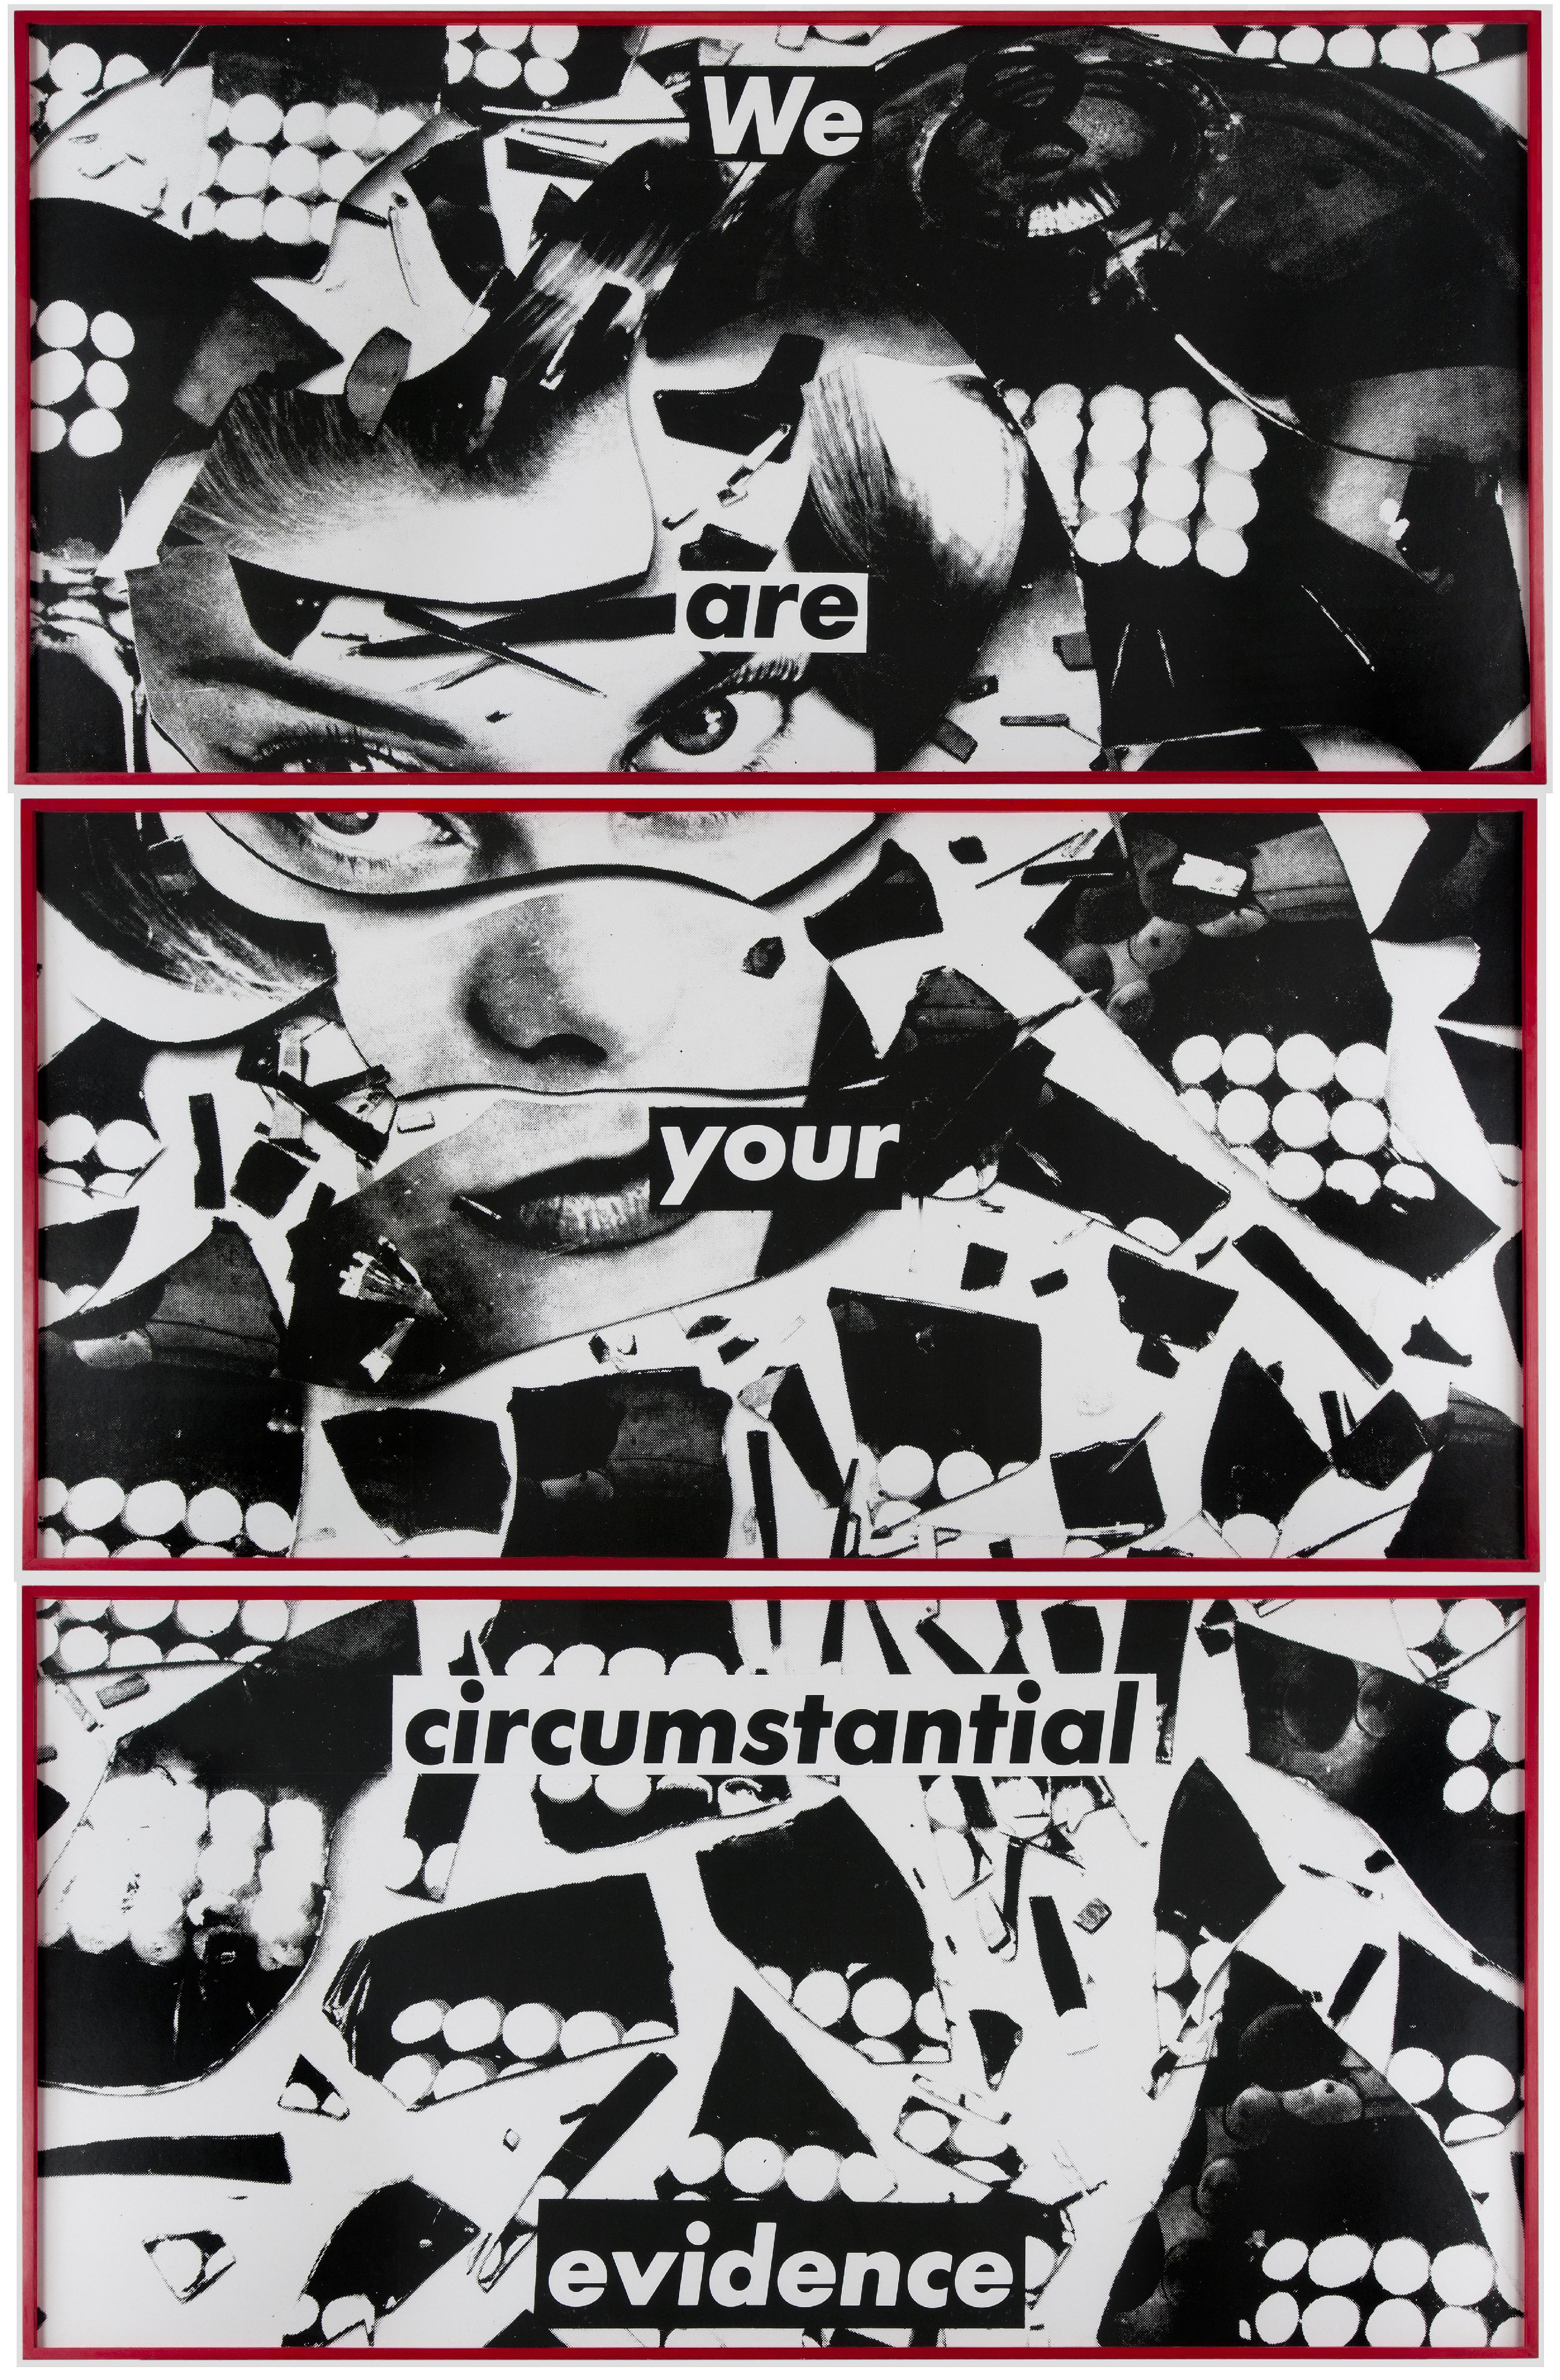 Barbara Kruger. Untitled (We are your circumstantial evidence). 1983. Source: Philadelphia Museum of Art